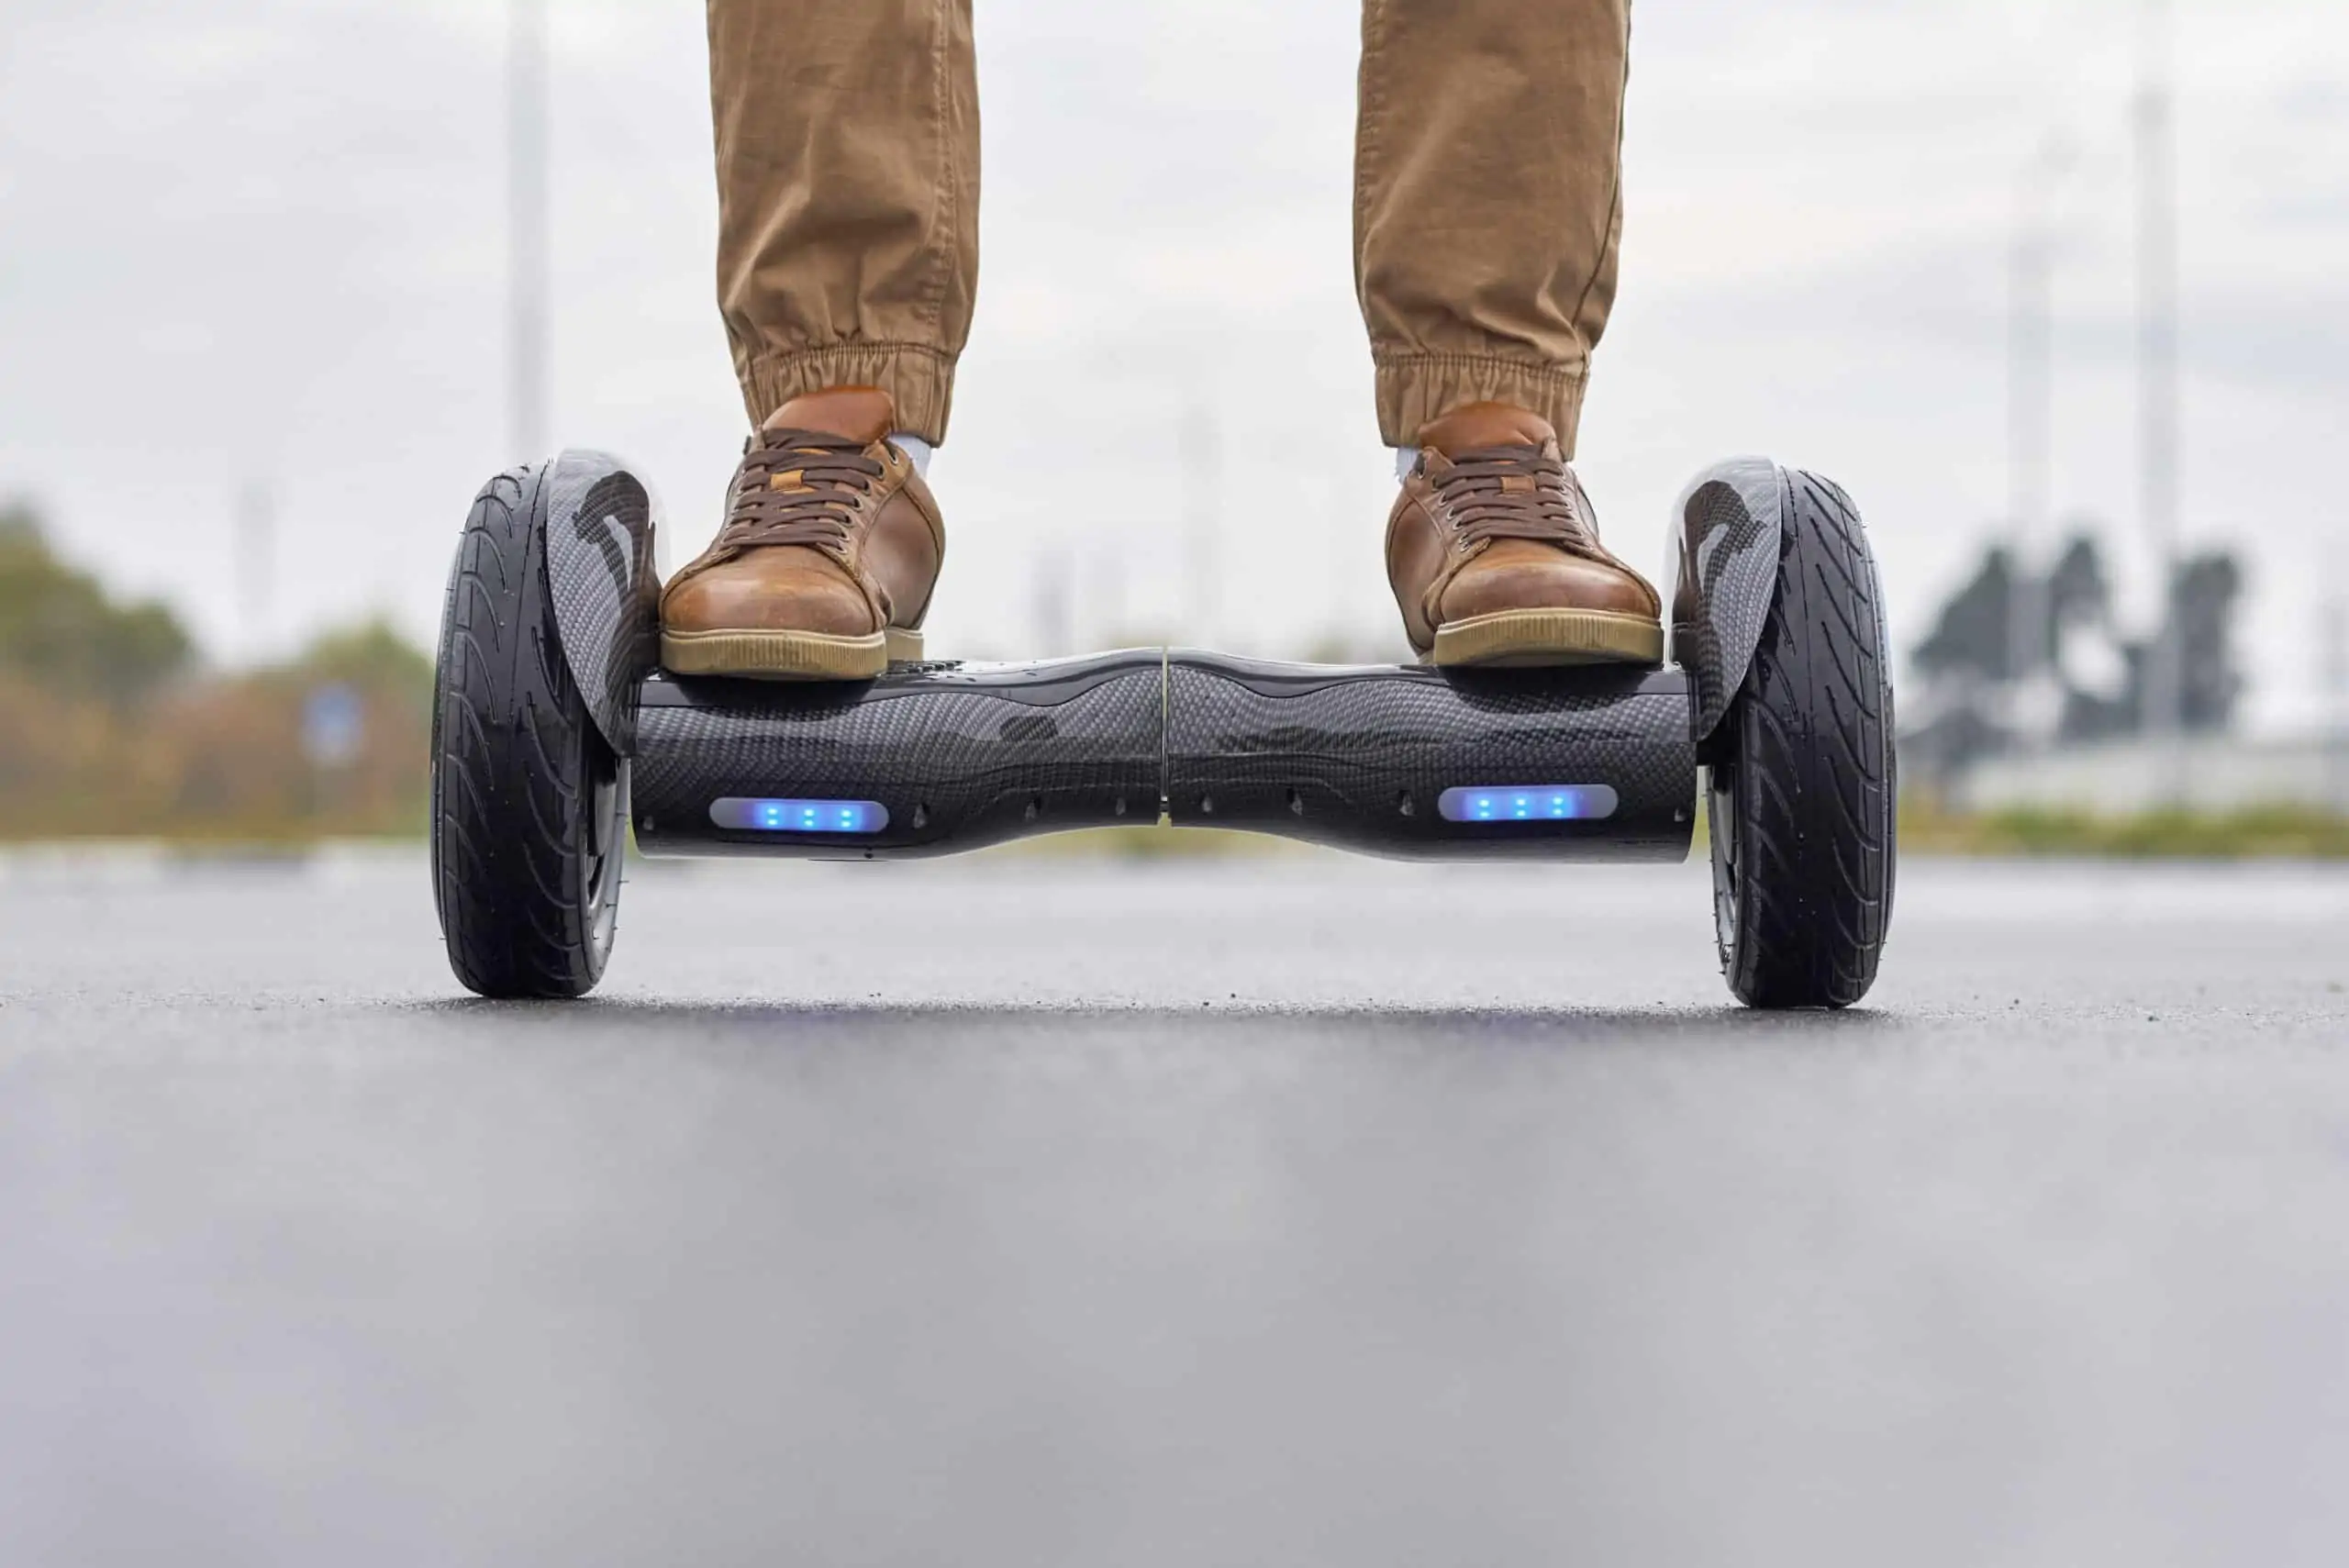 How Long Does It Take to Charge a Hoverboard